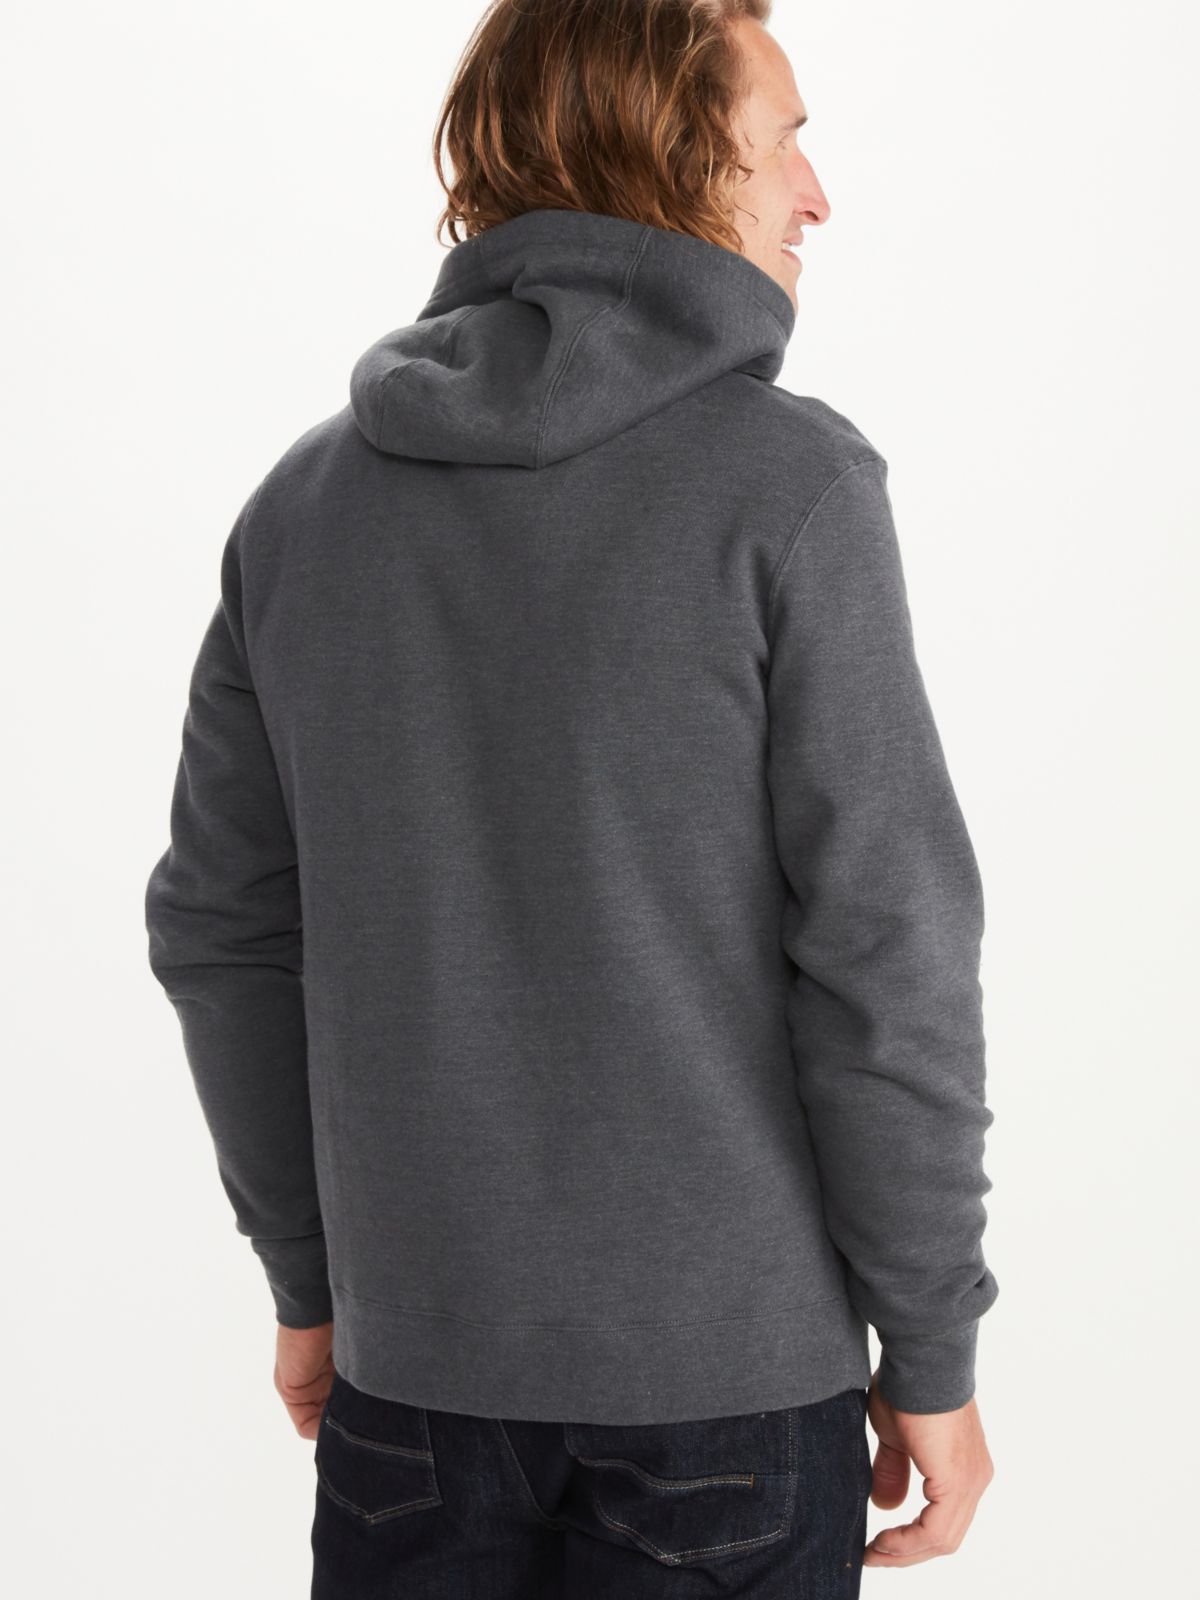 marmot fall collection hoodie